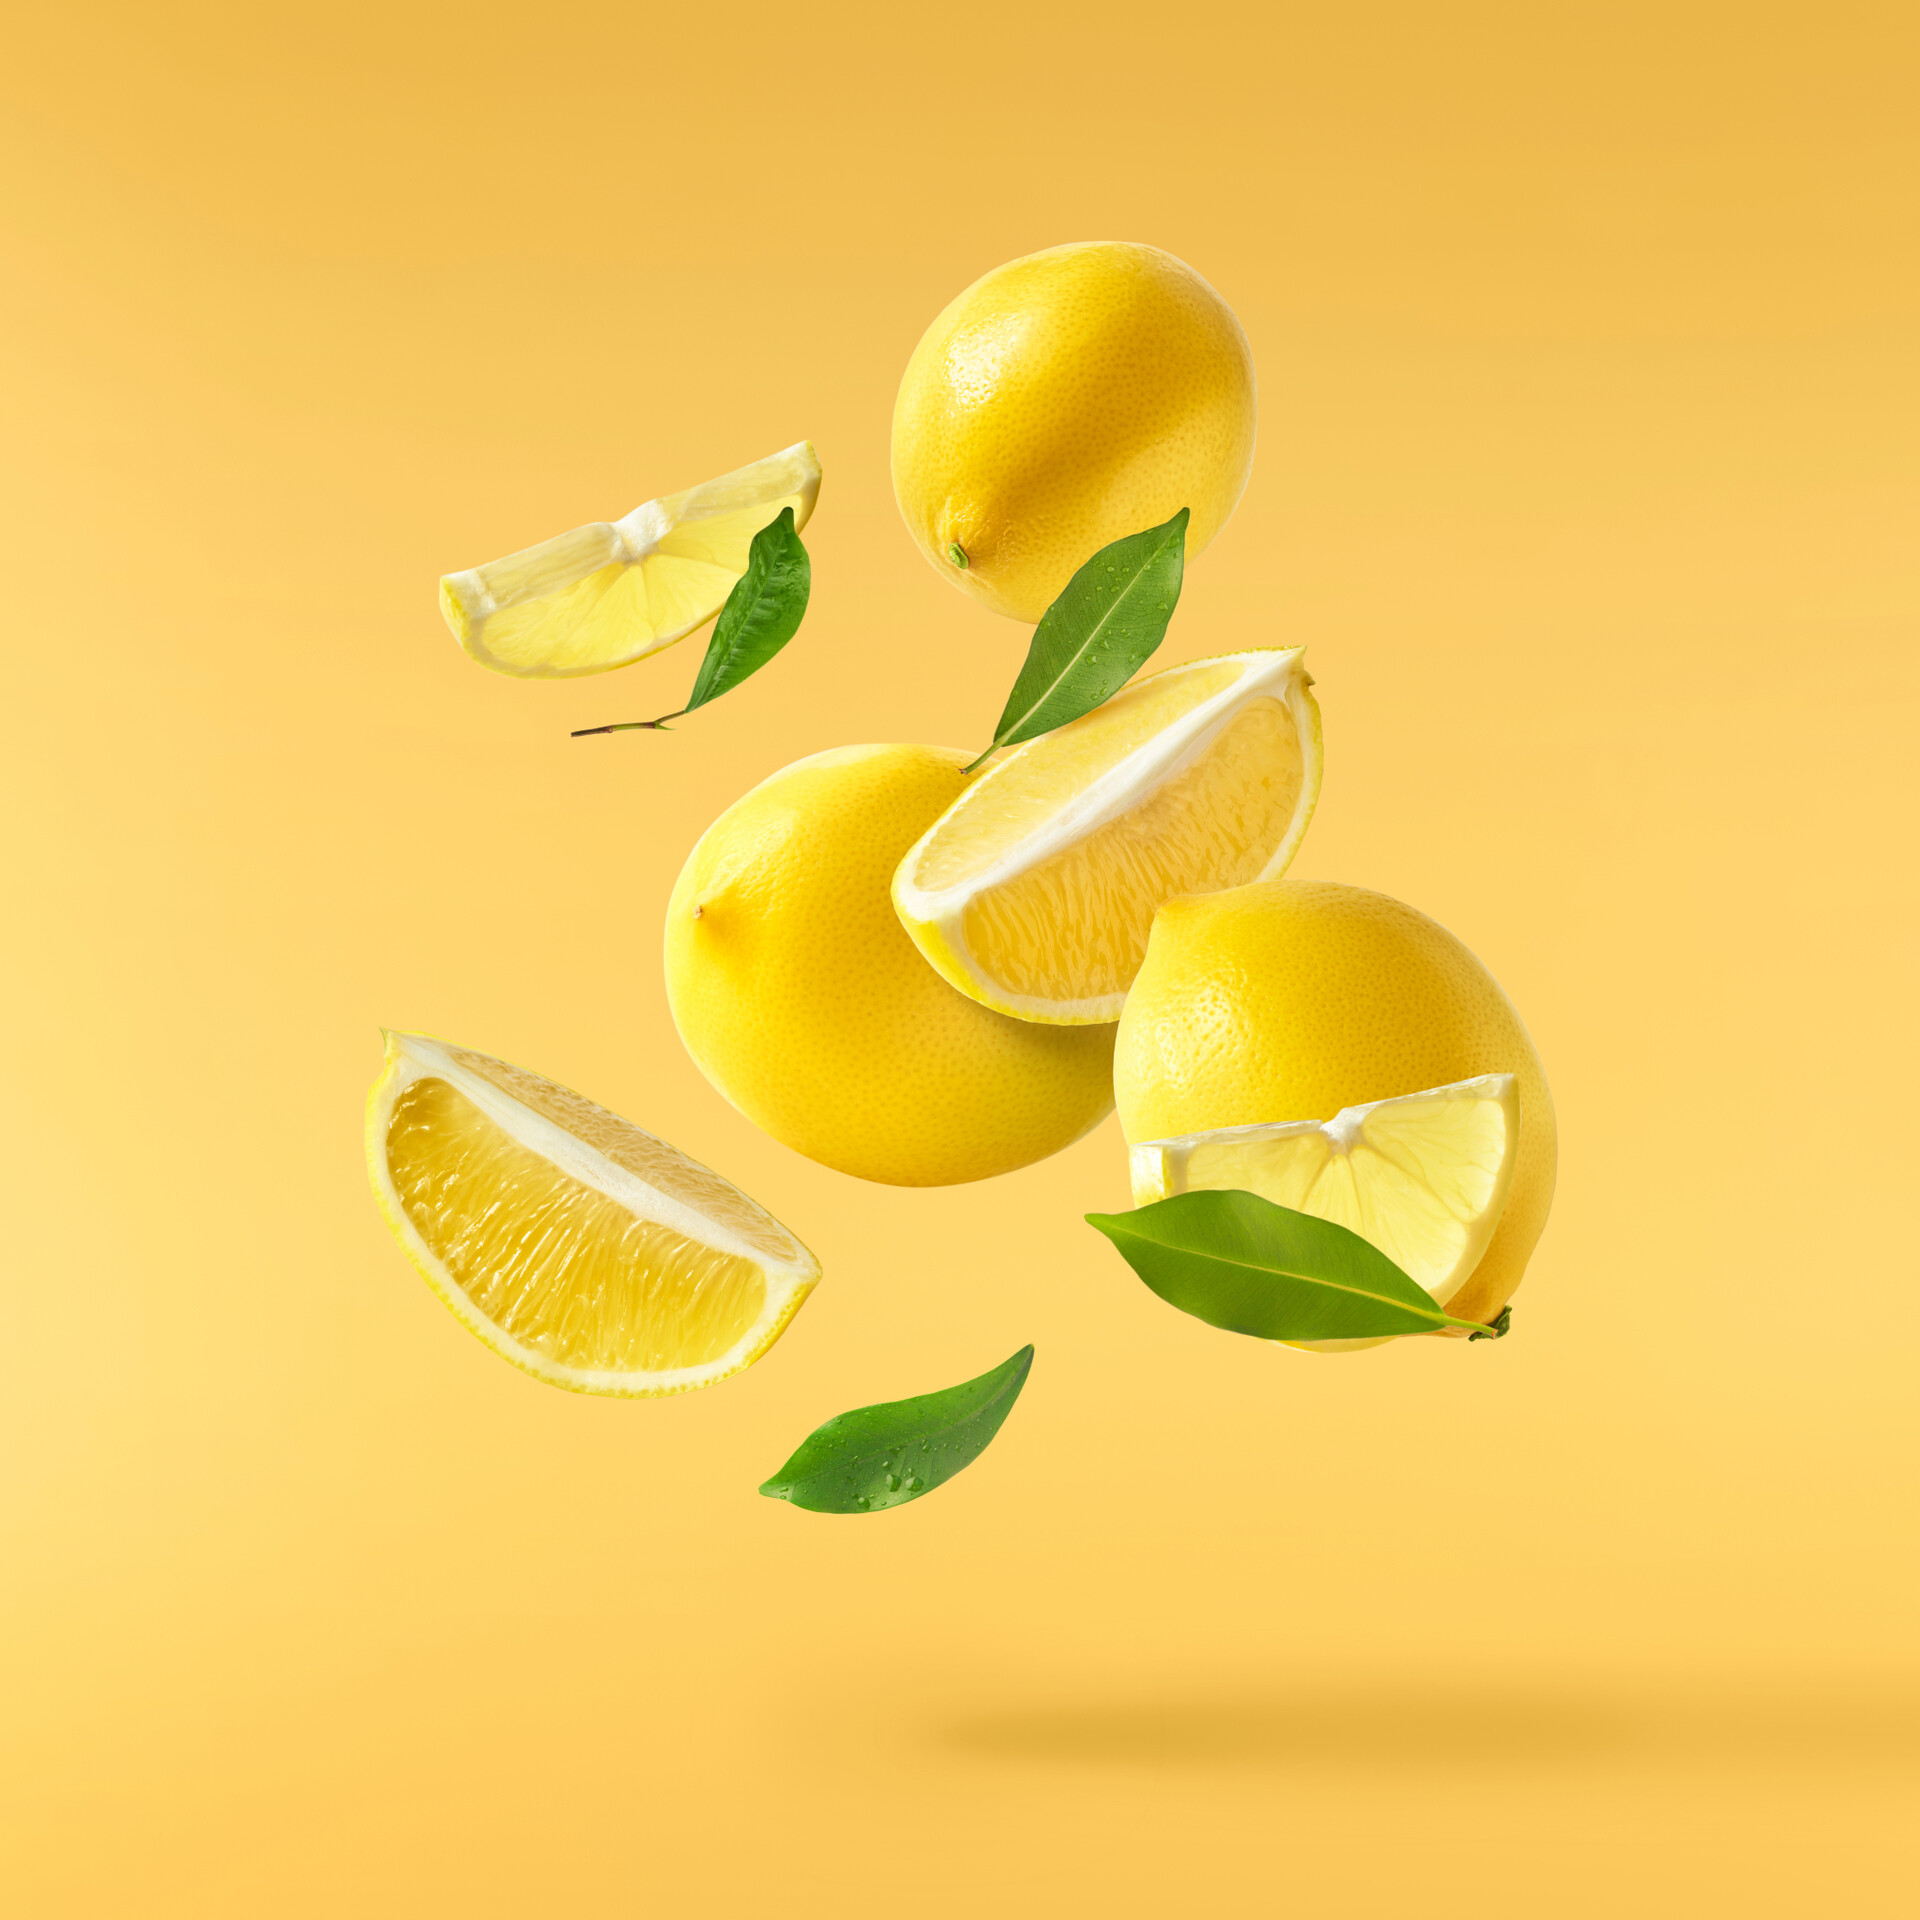 A stylised depiction of both full and sliced lemons, floating in the air, along with a few leaves.